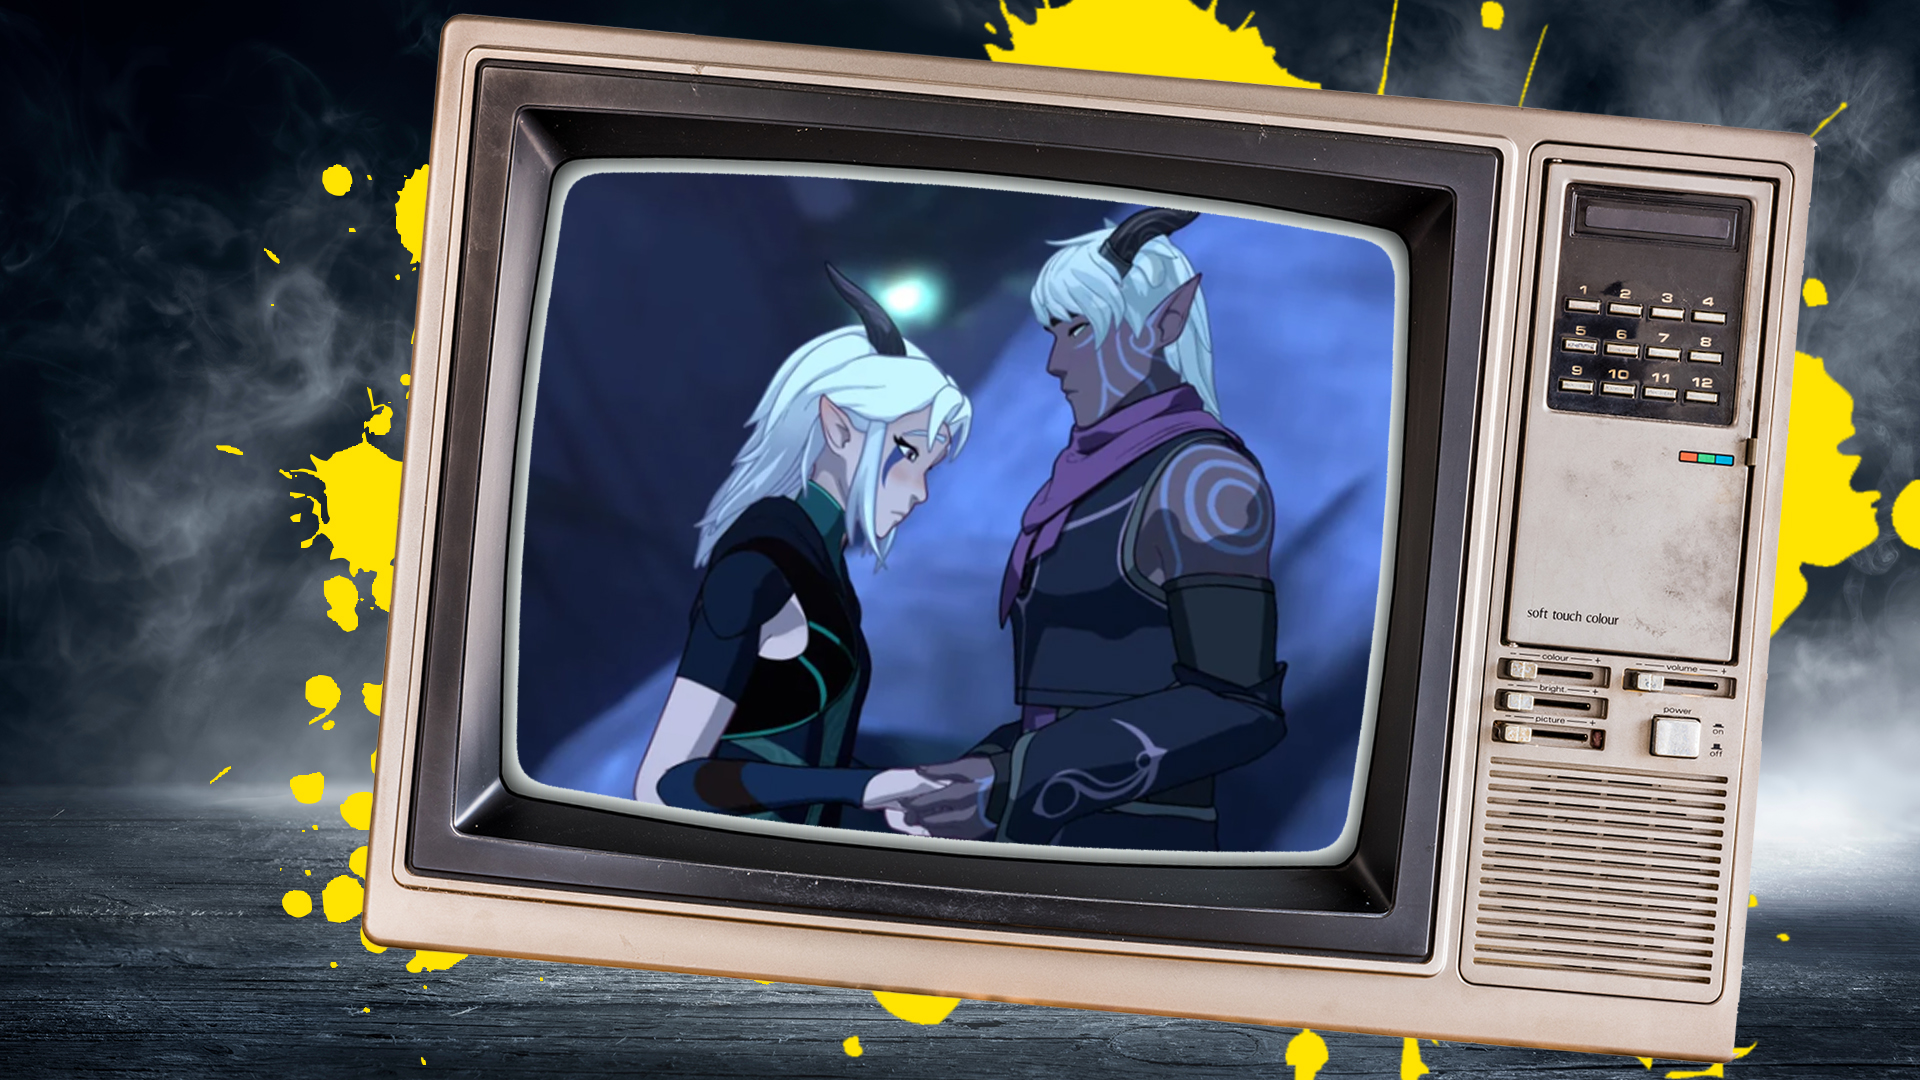 Moonshadow Elves from Dragon Prince shown on an old TV set